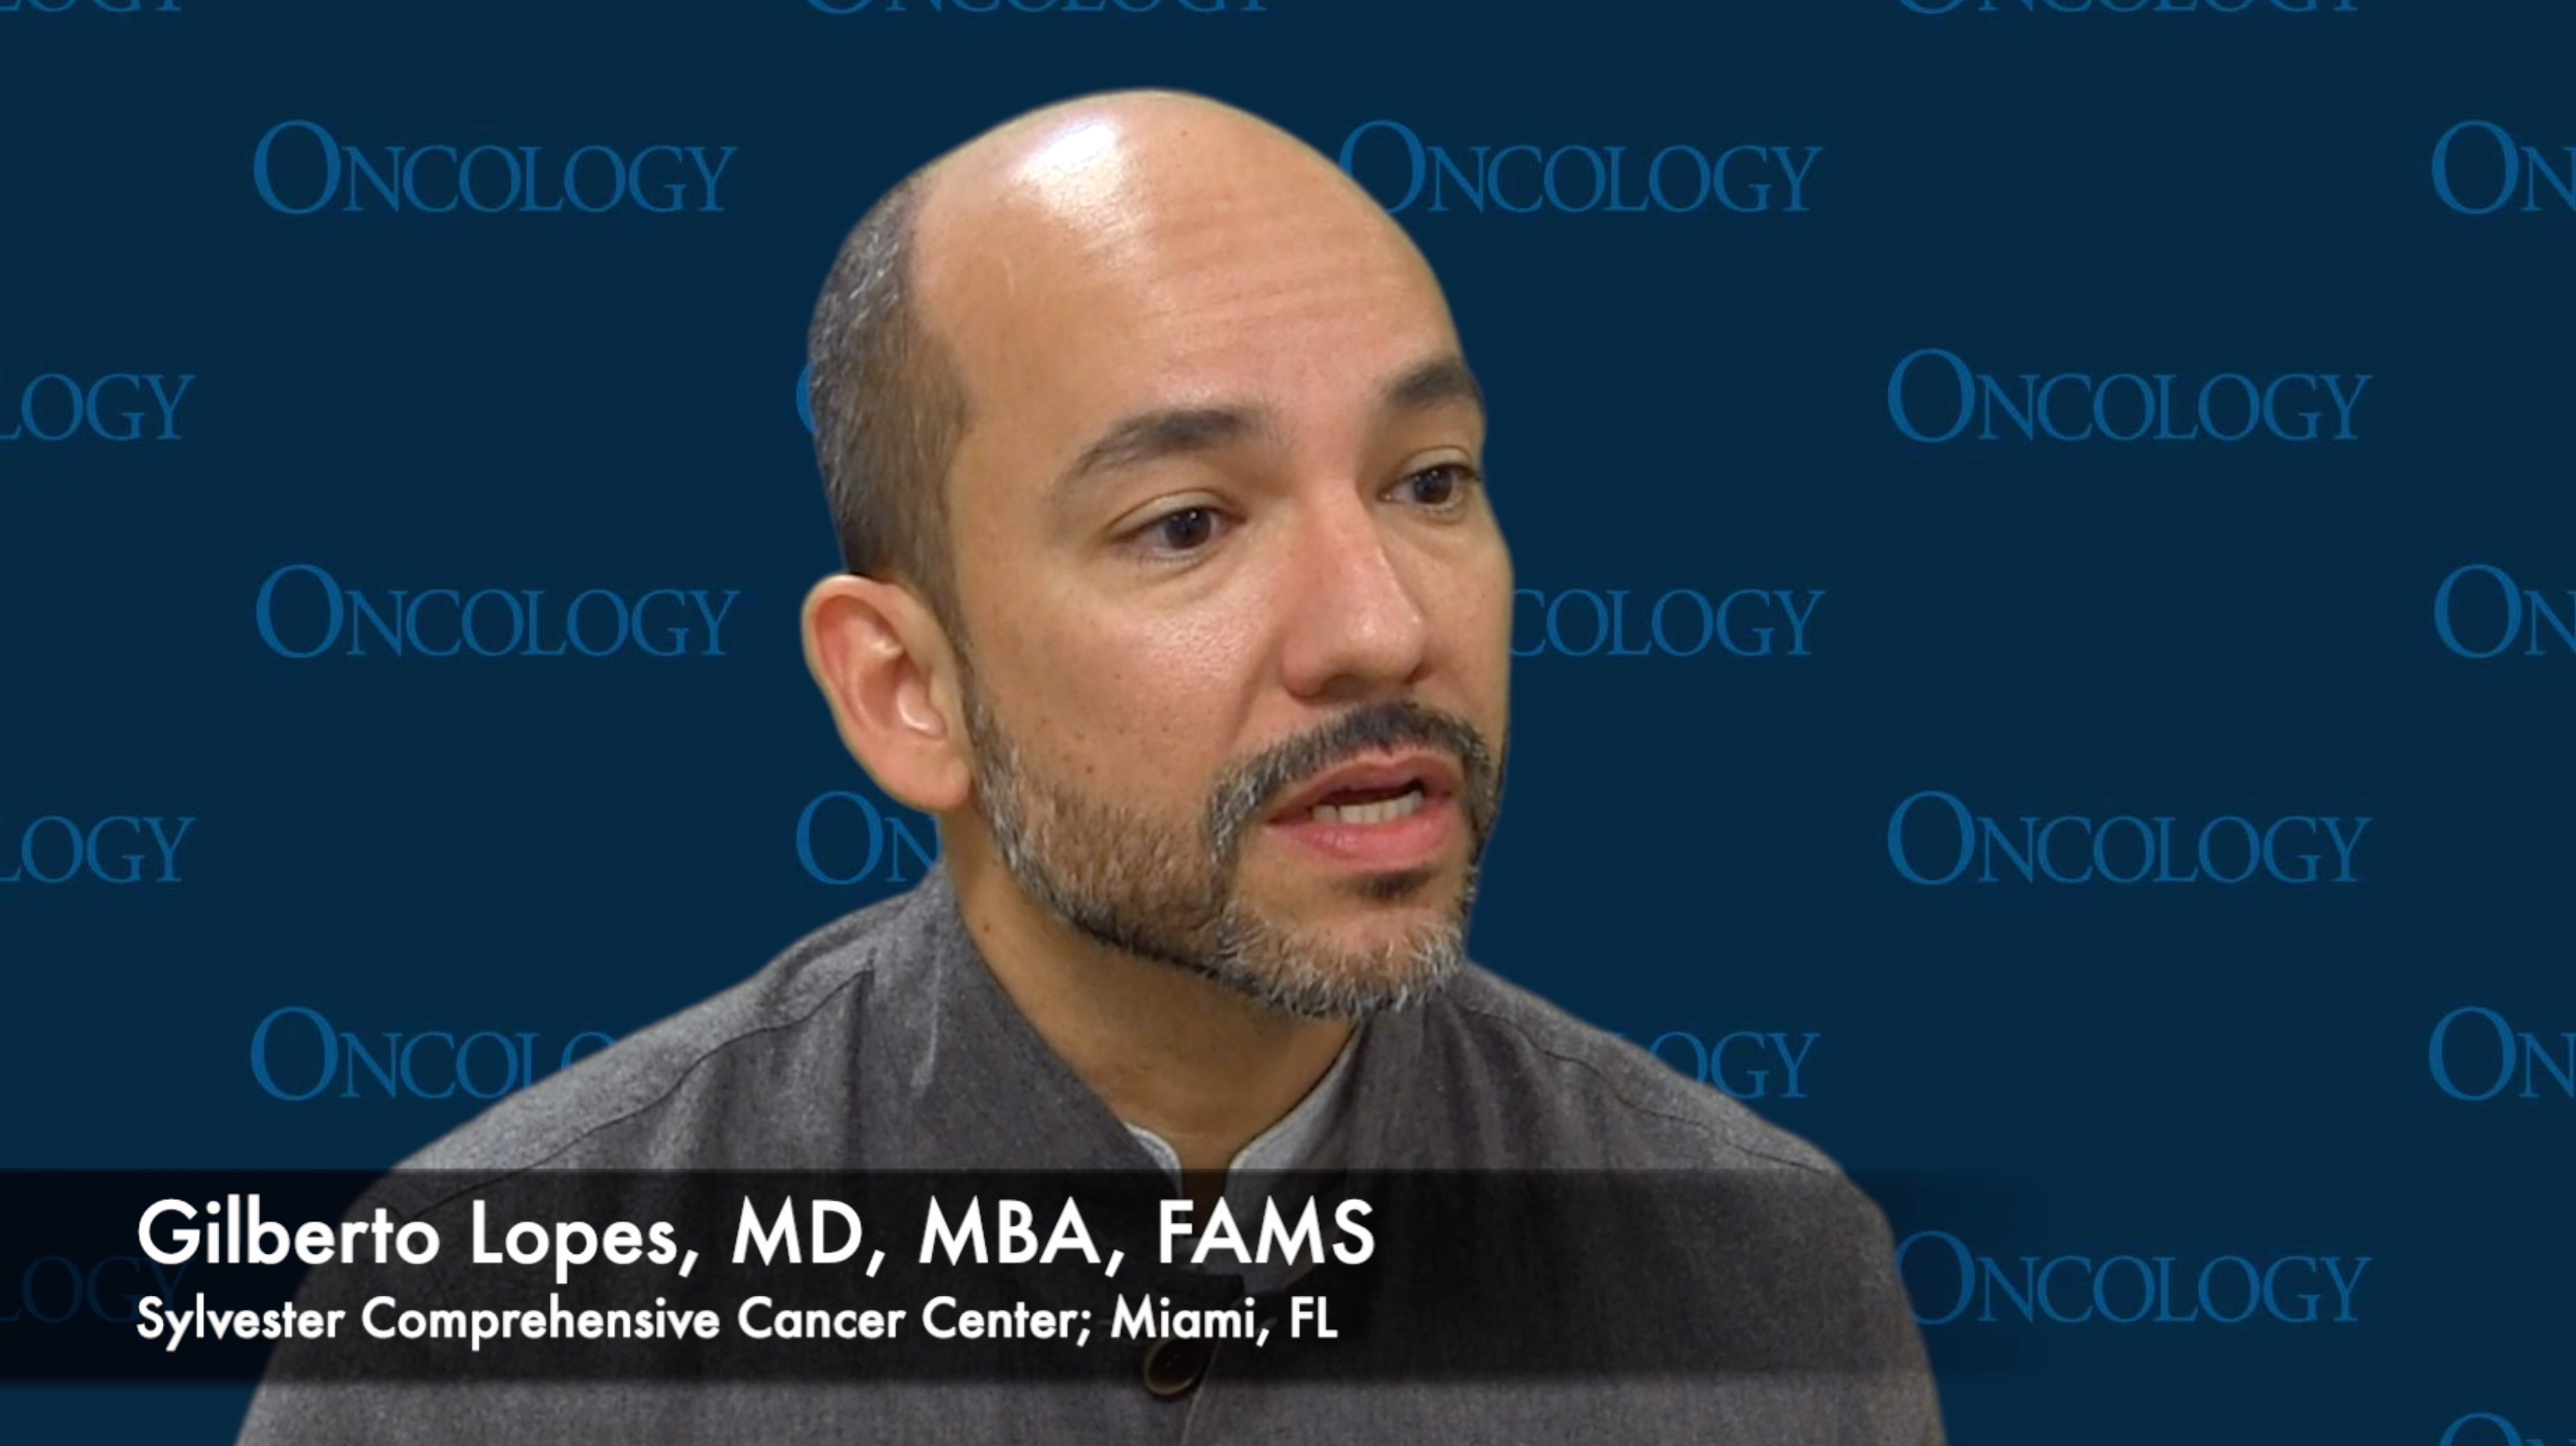 Gilberto Lopes, MD, MBA, FAMS, on Stopping Immunotherapy in Patients With Lung Cancer